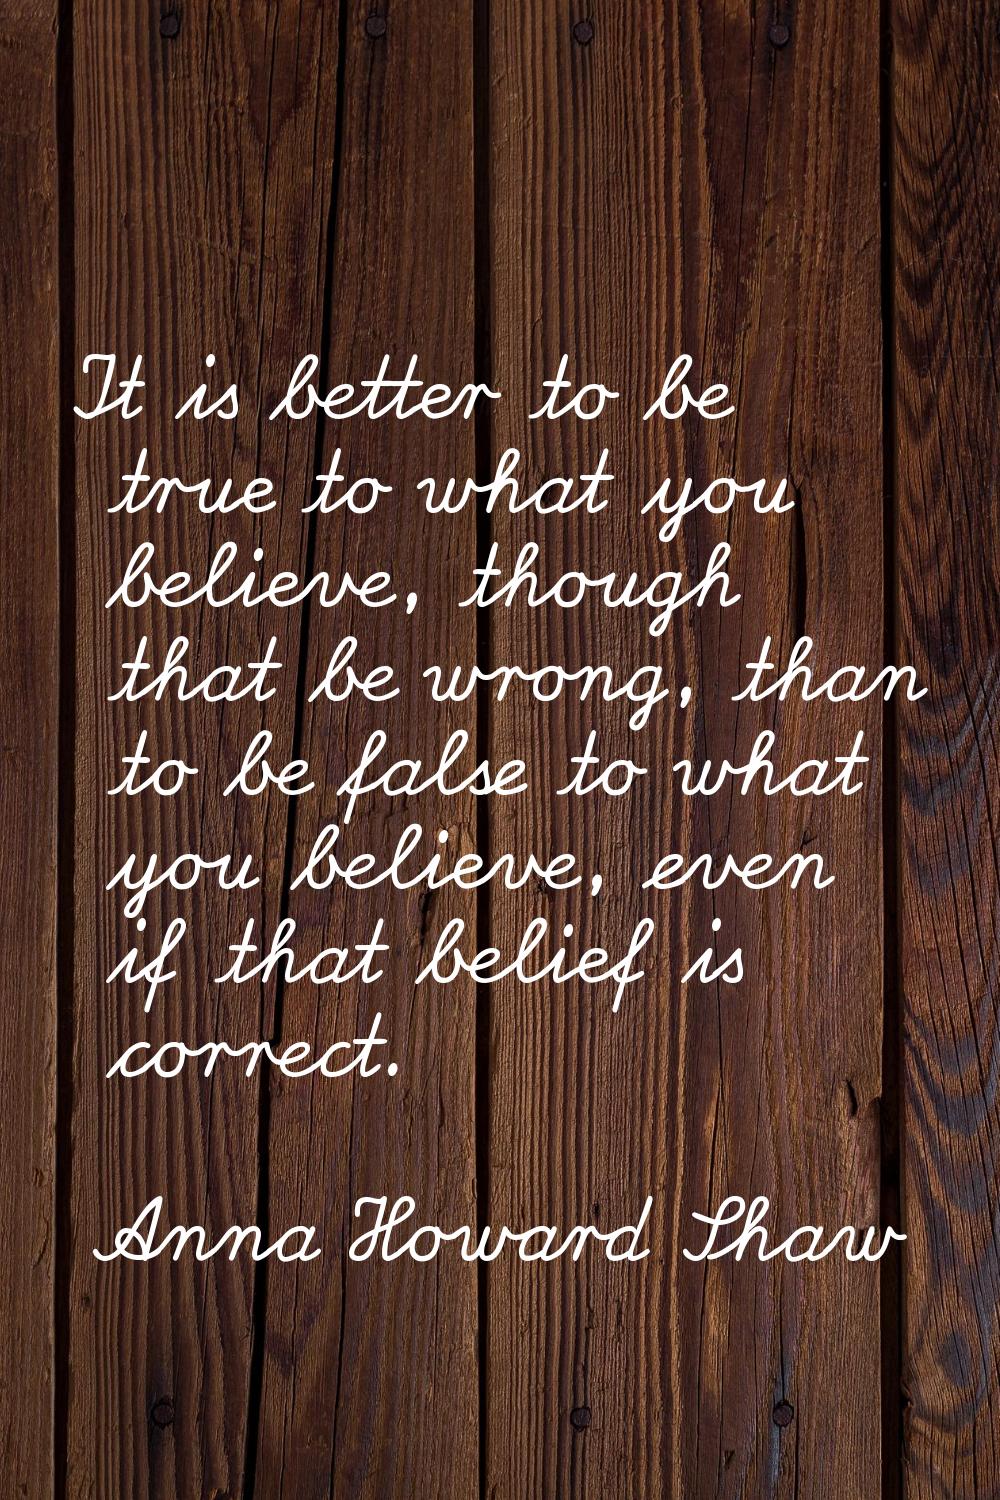 It is better to be true to what you believe, though that be wrong, than to be false to what you bel